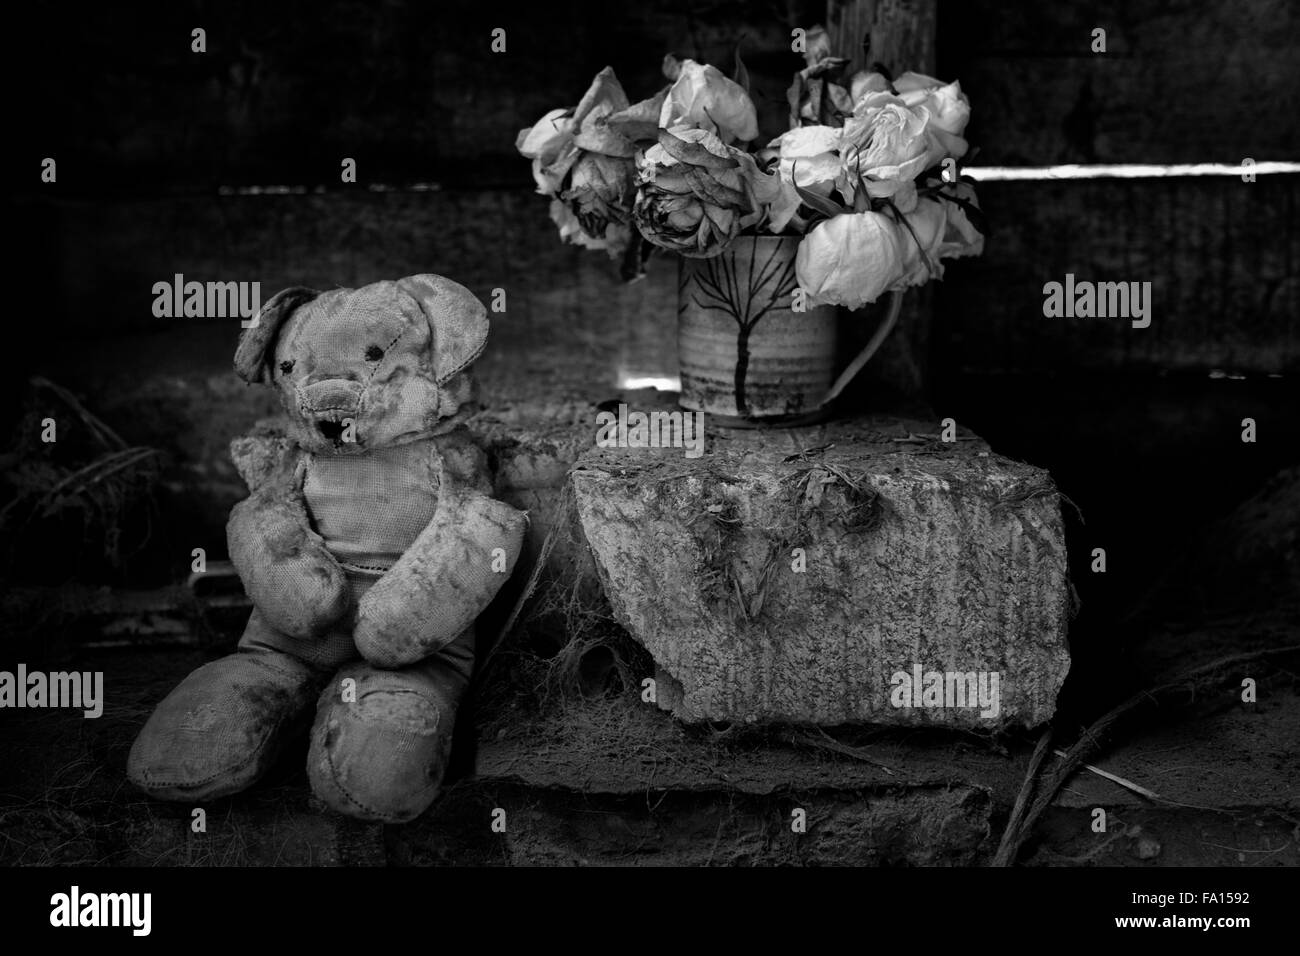 Vintage teddy bear with faded roses in a grungy setting Stock Photo